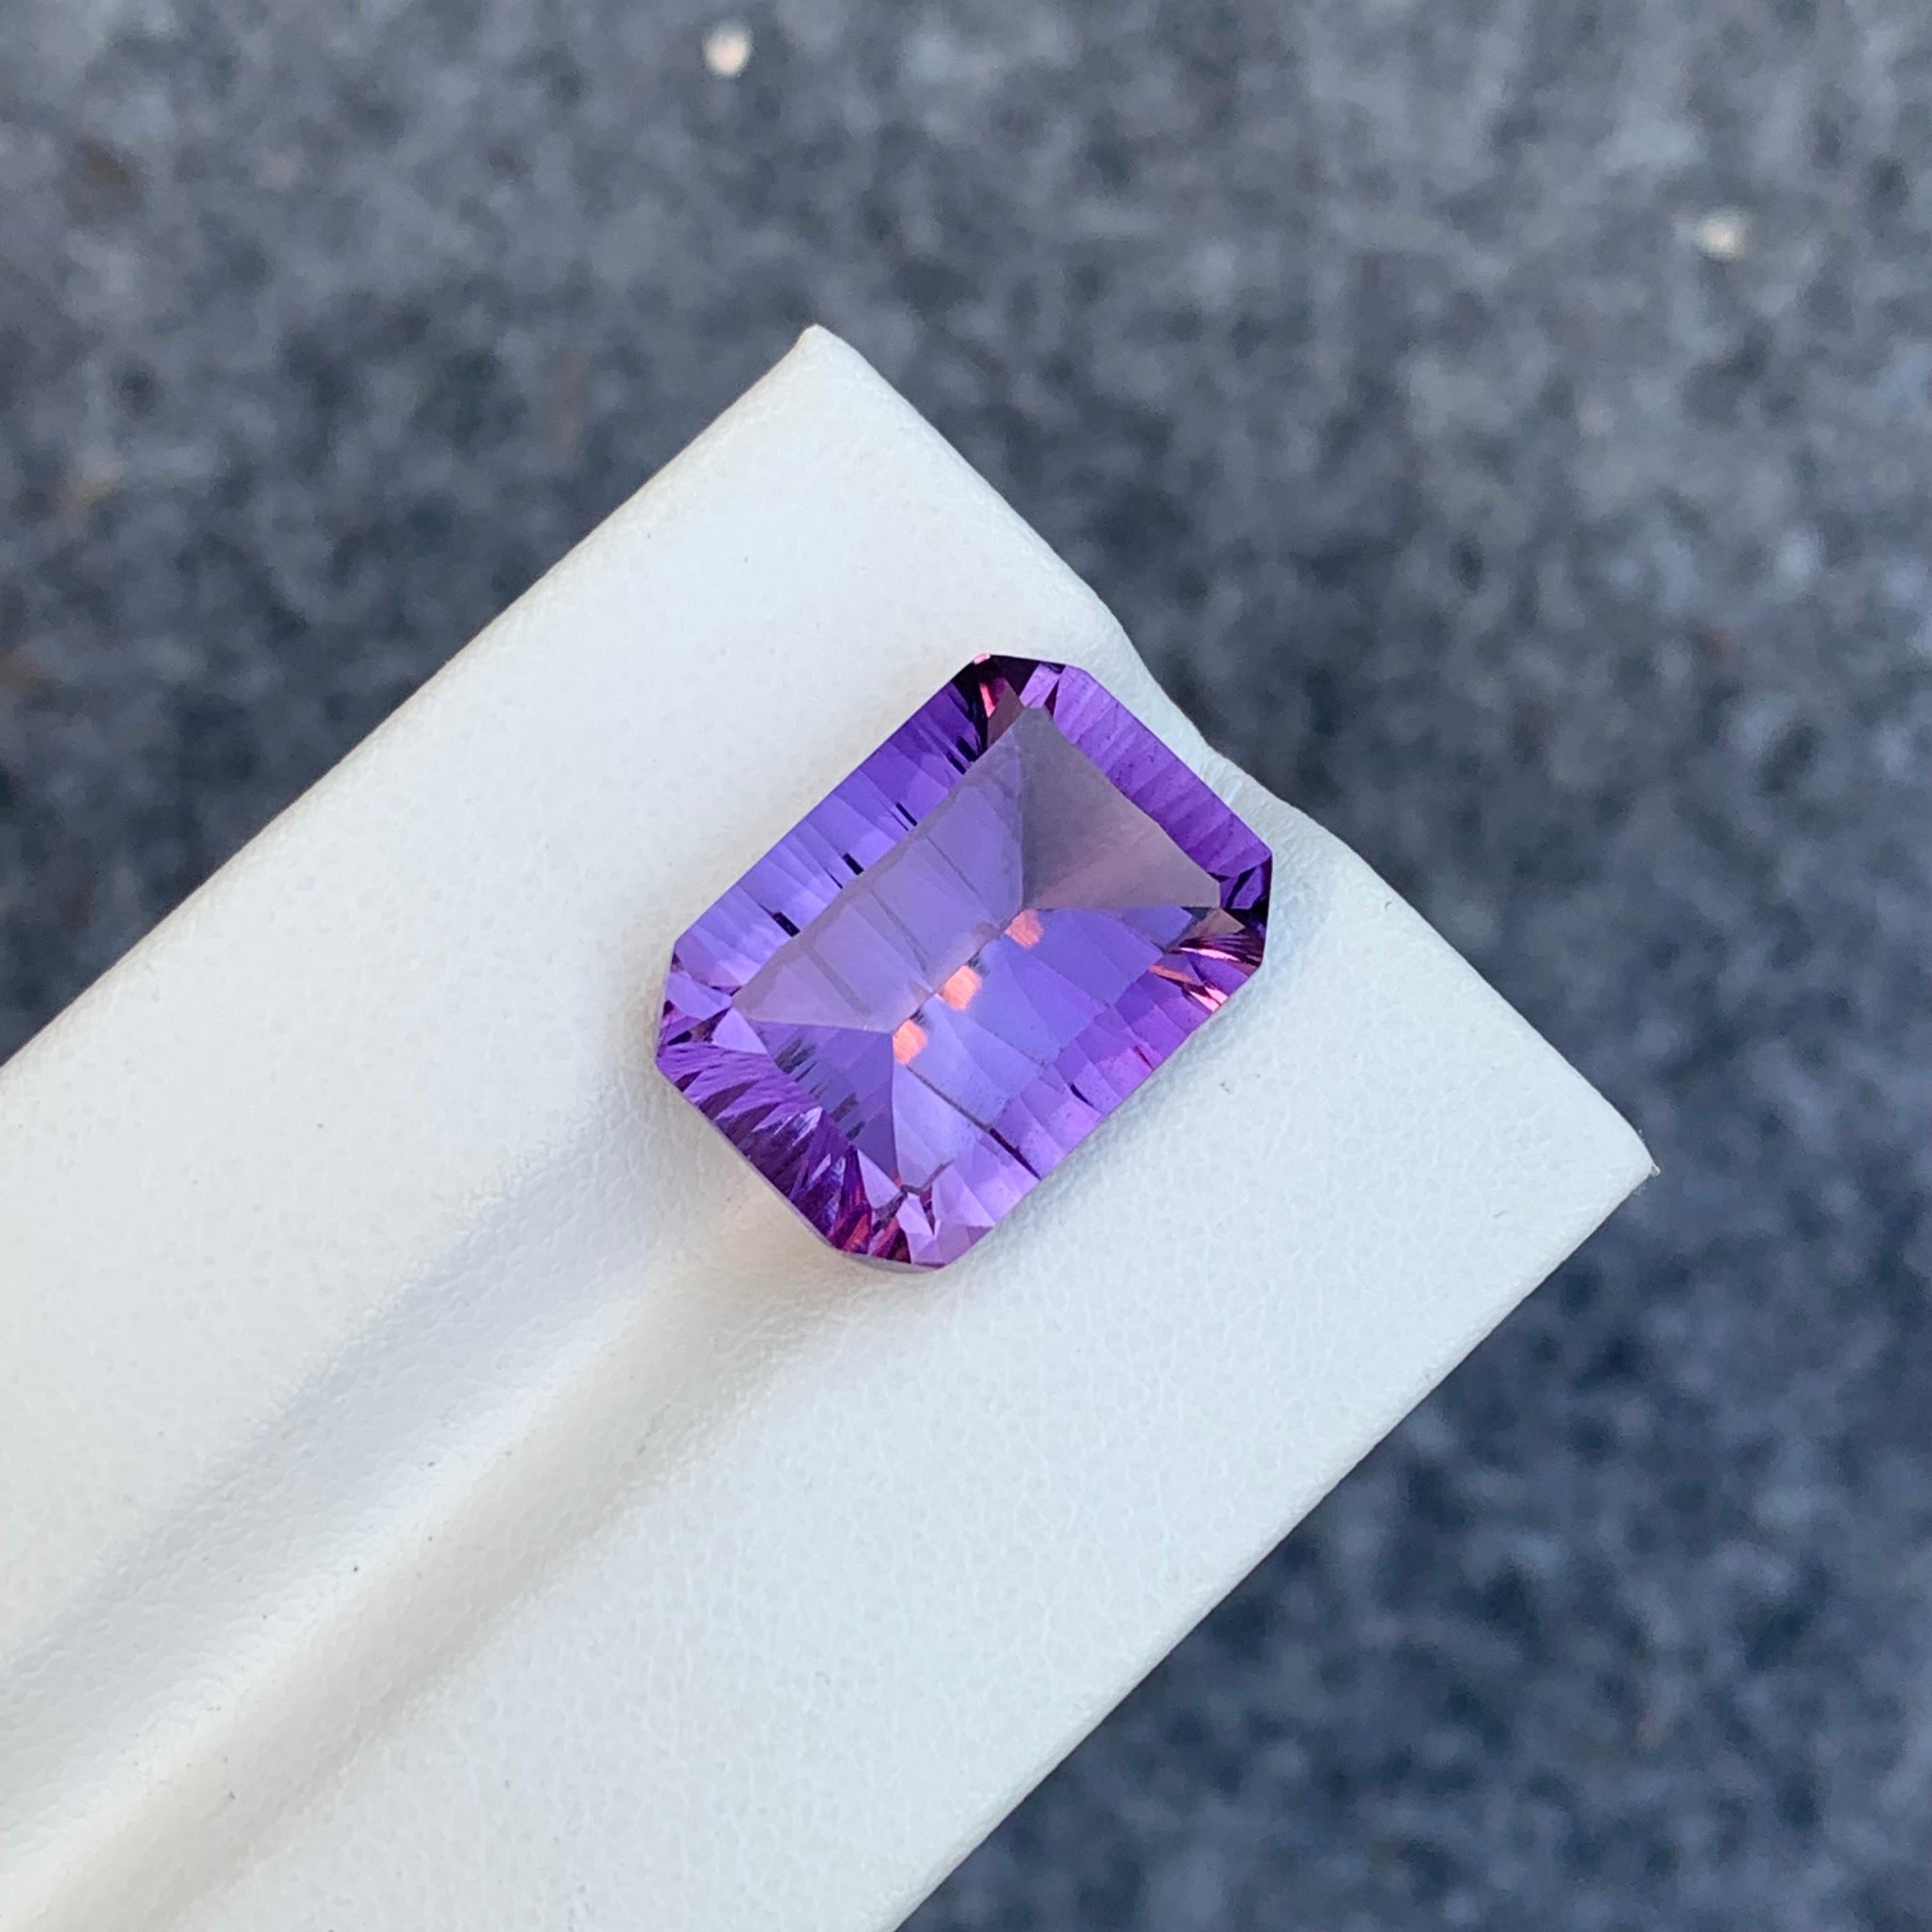 Loose Amethyst
Weight: 10.60 Carats
Dimension: 16.4 x 11.7 x 7.8 Mm
Colour: Purple
Origin: Brazil
Treatment: Non
Certificate: On Demand
Shape: Emerald 

Amethyst, a stunning variety of quartz known for its mesmerizing purple hue, has captivated